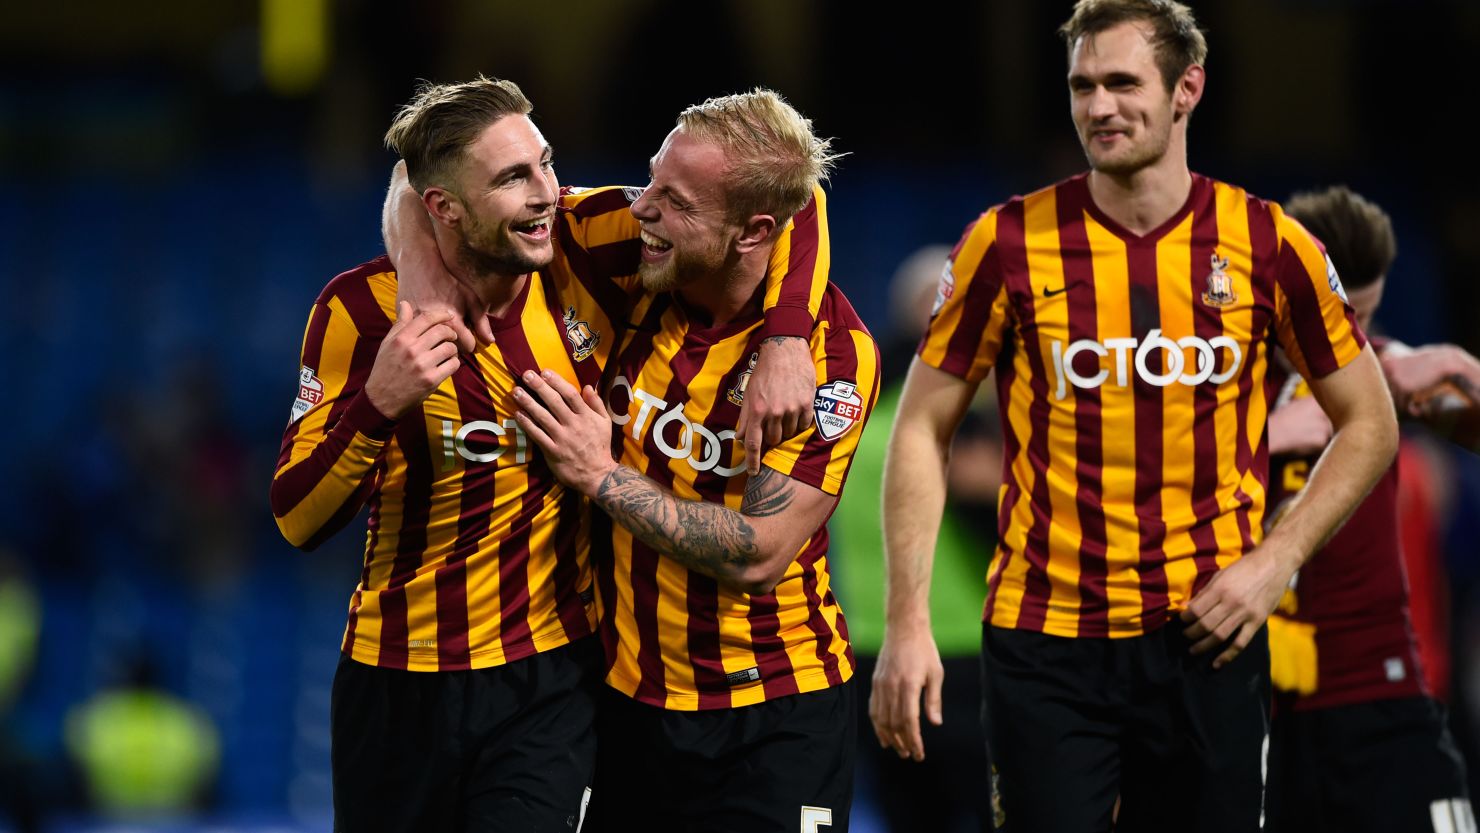 Bradford City knocked Chelsea out of the Fa Cup after winning 4-2. 